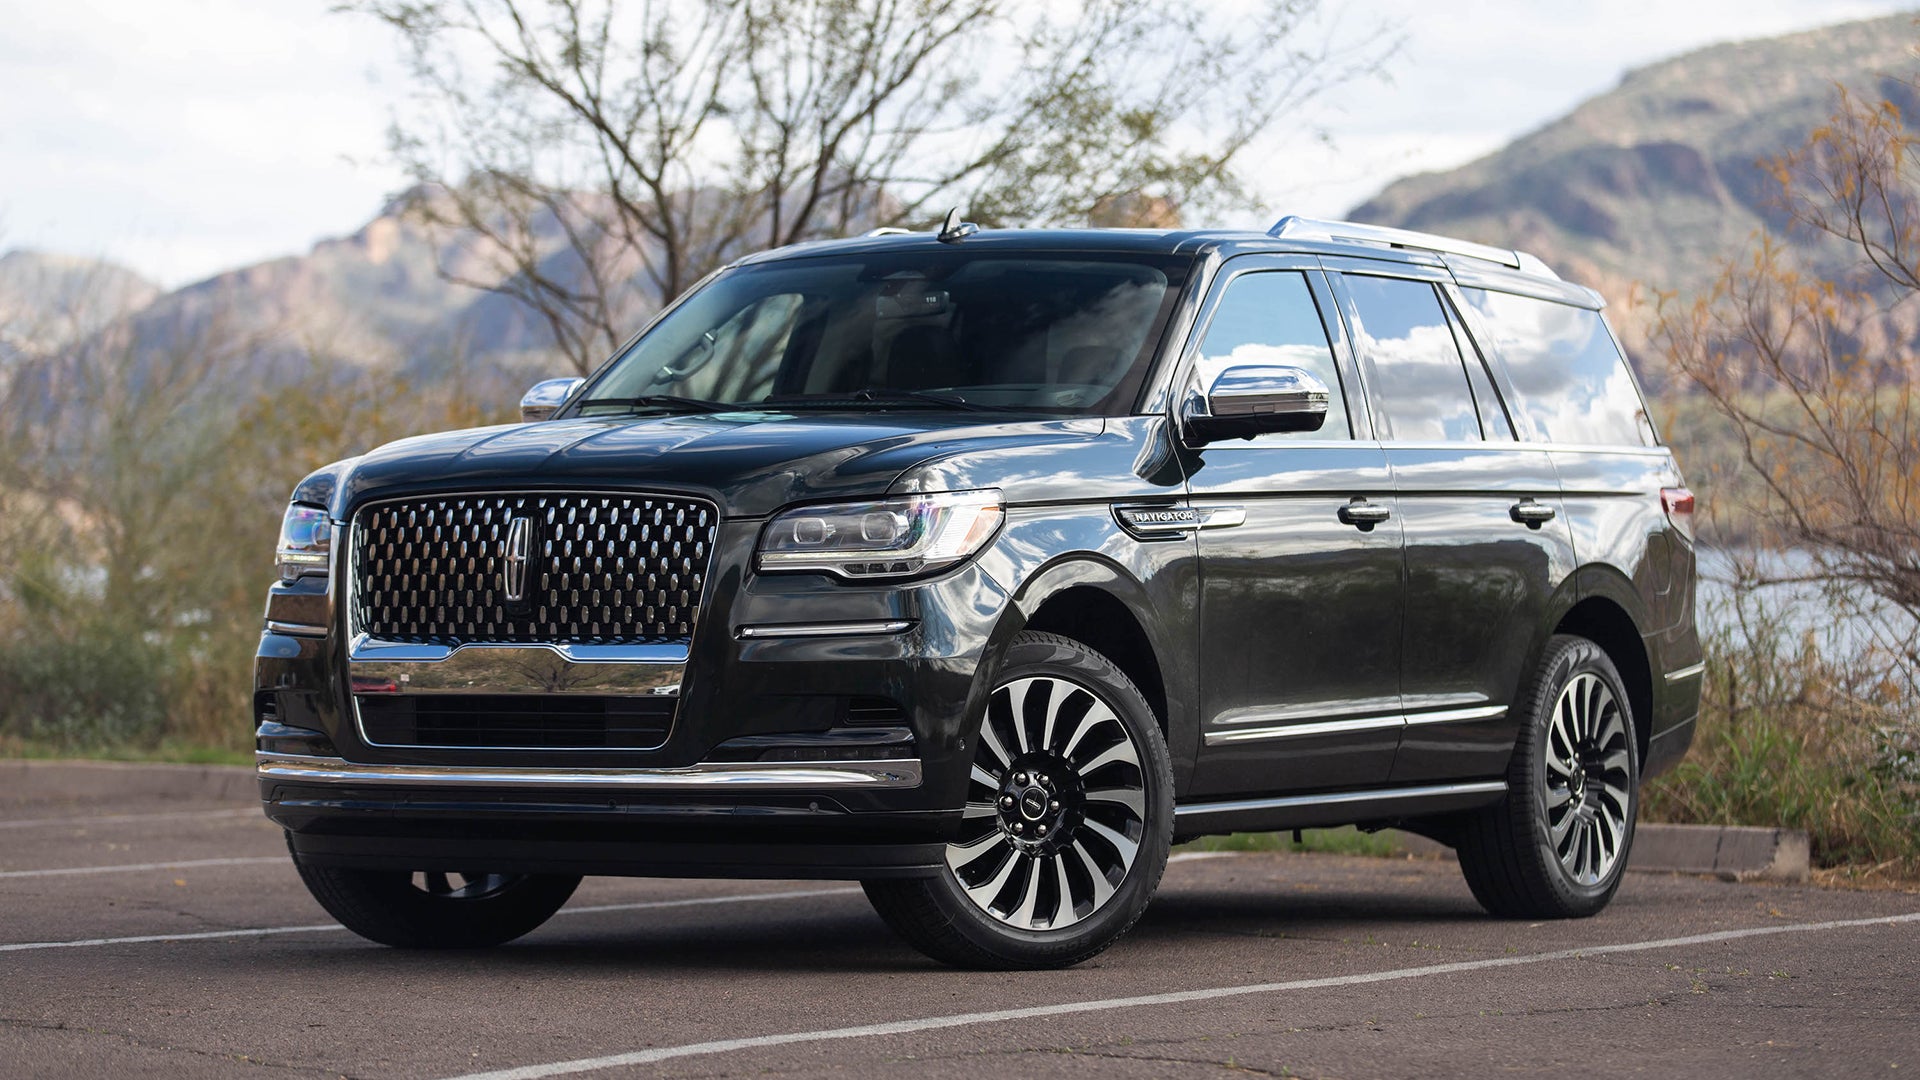 Penmanship Prisoner Clean the bedroom 2022 Lincoln Navigator First Drive Review: An Updated Land Yacht Coming for  Cadillac's Ass